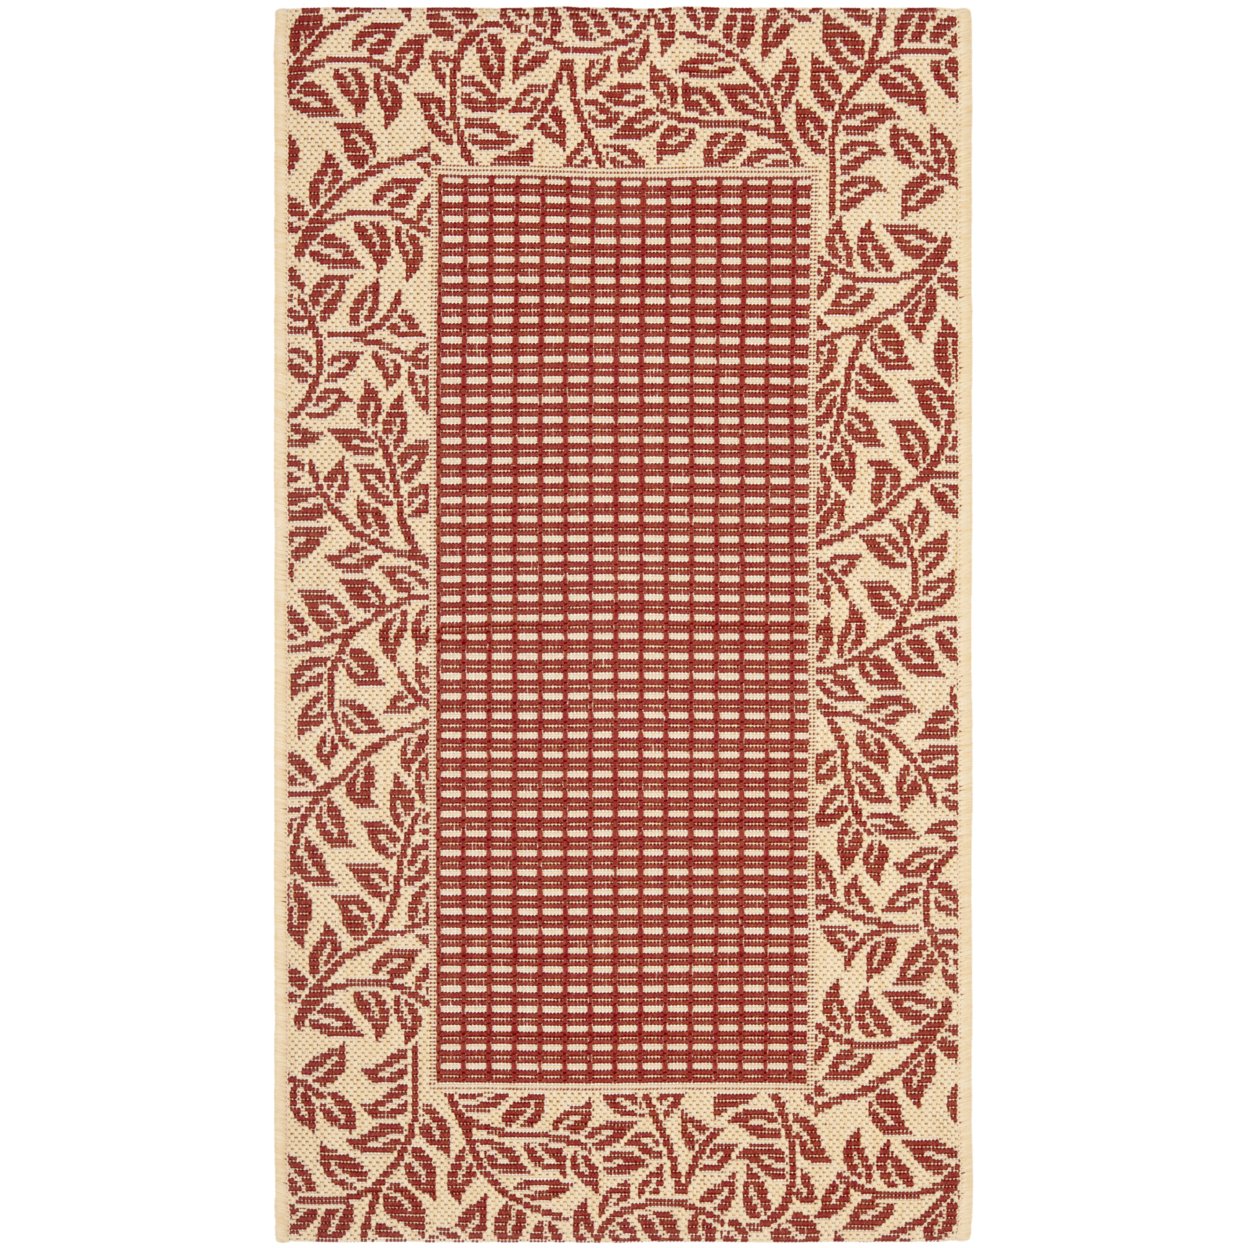 SAFAVIEH Courtyard CY0727-3707 Red / Natural Rug - 2' X 3' 7